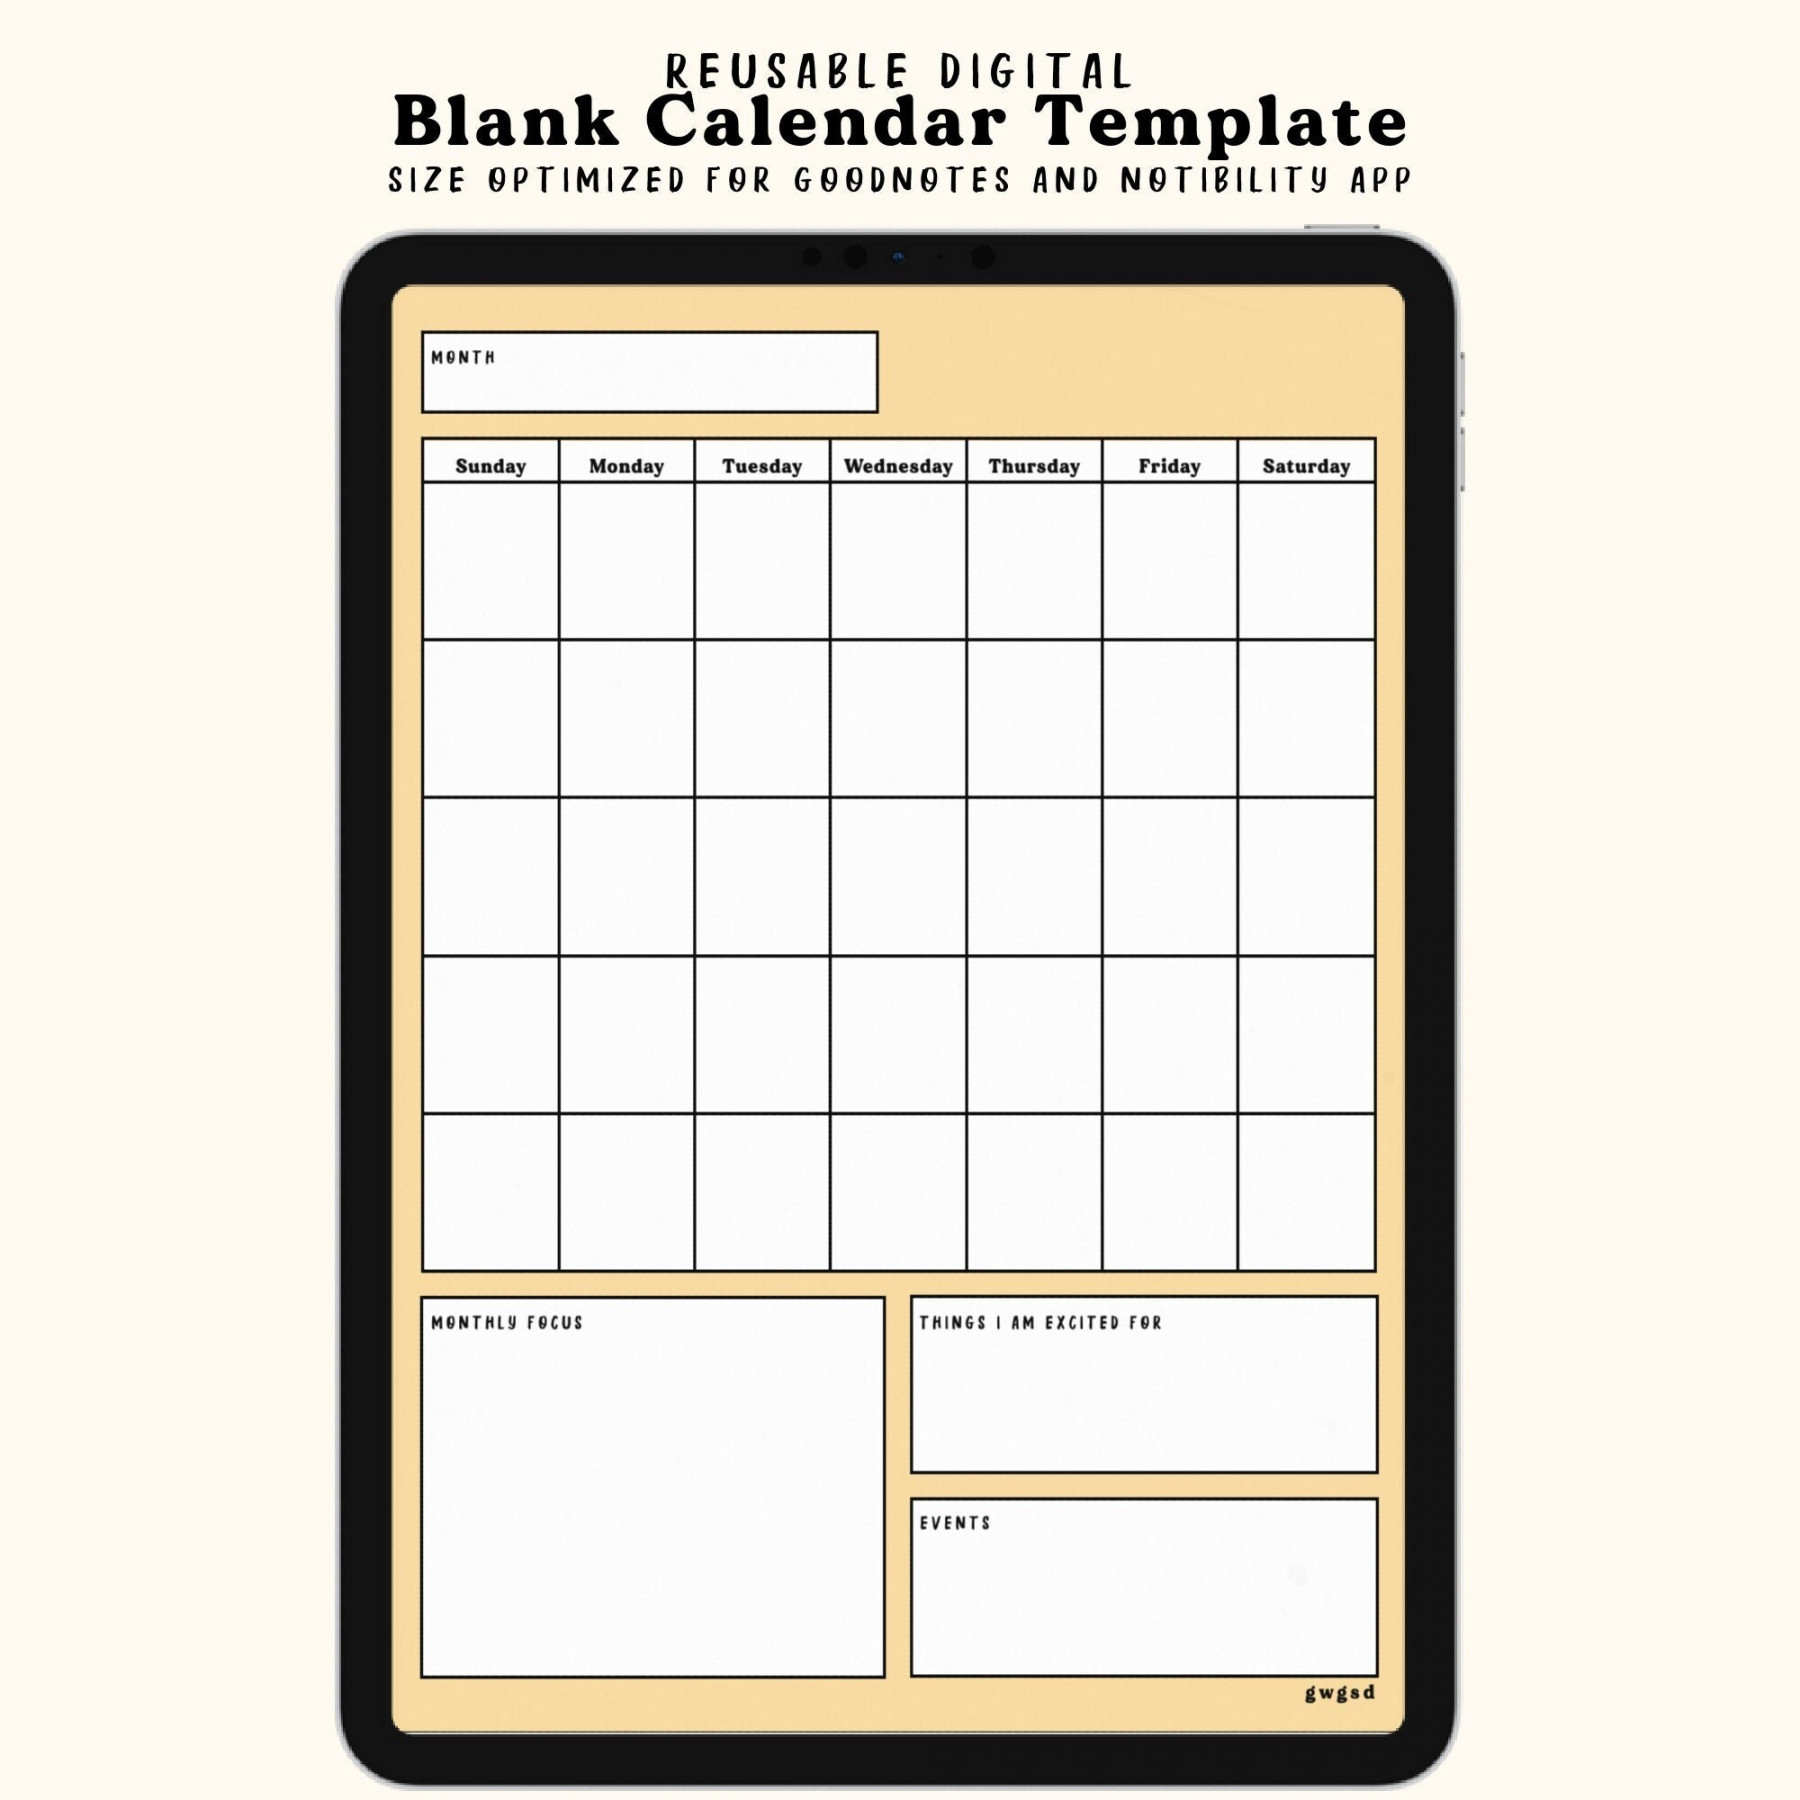 Blank Calendar Template for iPad Undated Reusable Monthly - Etsy